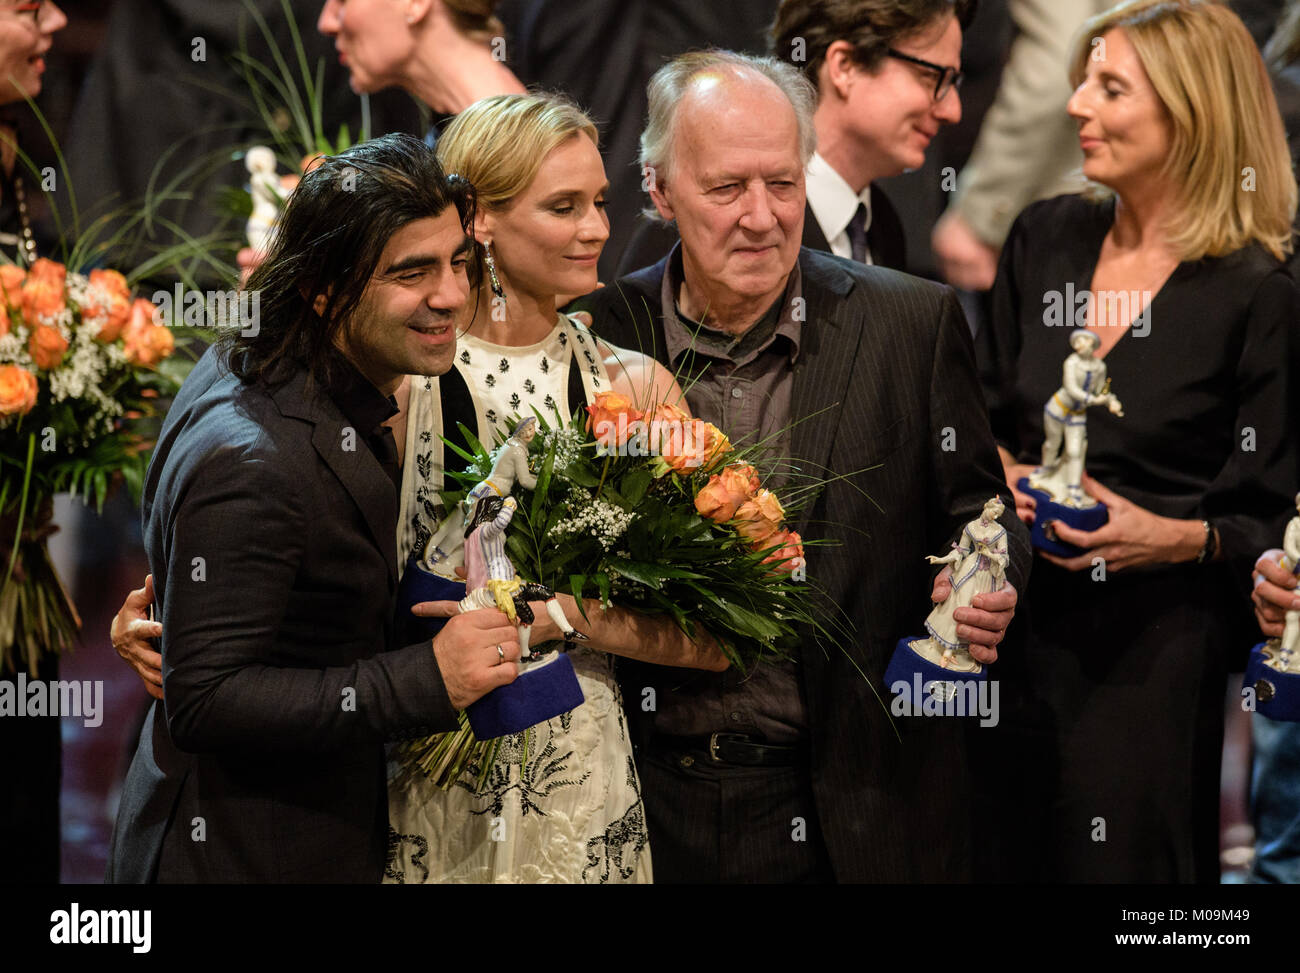 Munich, Germany. 19th Jan, 2018. Film director Fatih Akin (L-R), actress Diane Kruger and director Werner Herzog stand next to each holding their trophies in their hands after the award ceremony of the Bavarian Film Prize 2017 in Munich, Germany, 19 January 2018. Akin (Best Director) and Kruger (Best Actress) were both awarded for their new film 'In the Fade' (Aus dem Nichts) and Herzog received the honourary award of the Bavarian Premier. Credit: Ursula Düren/dpa/Alamy Live News Stock Photo